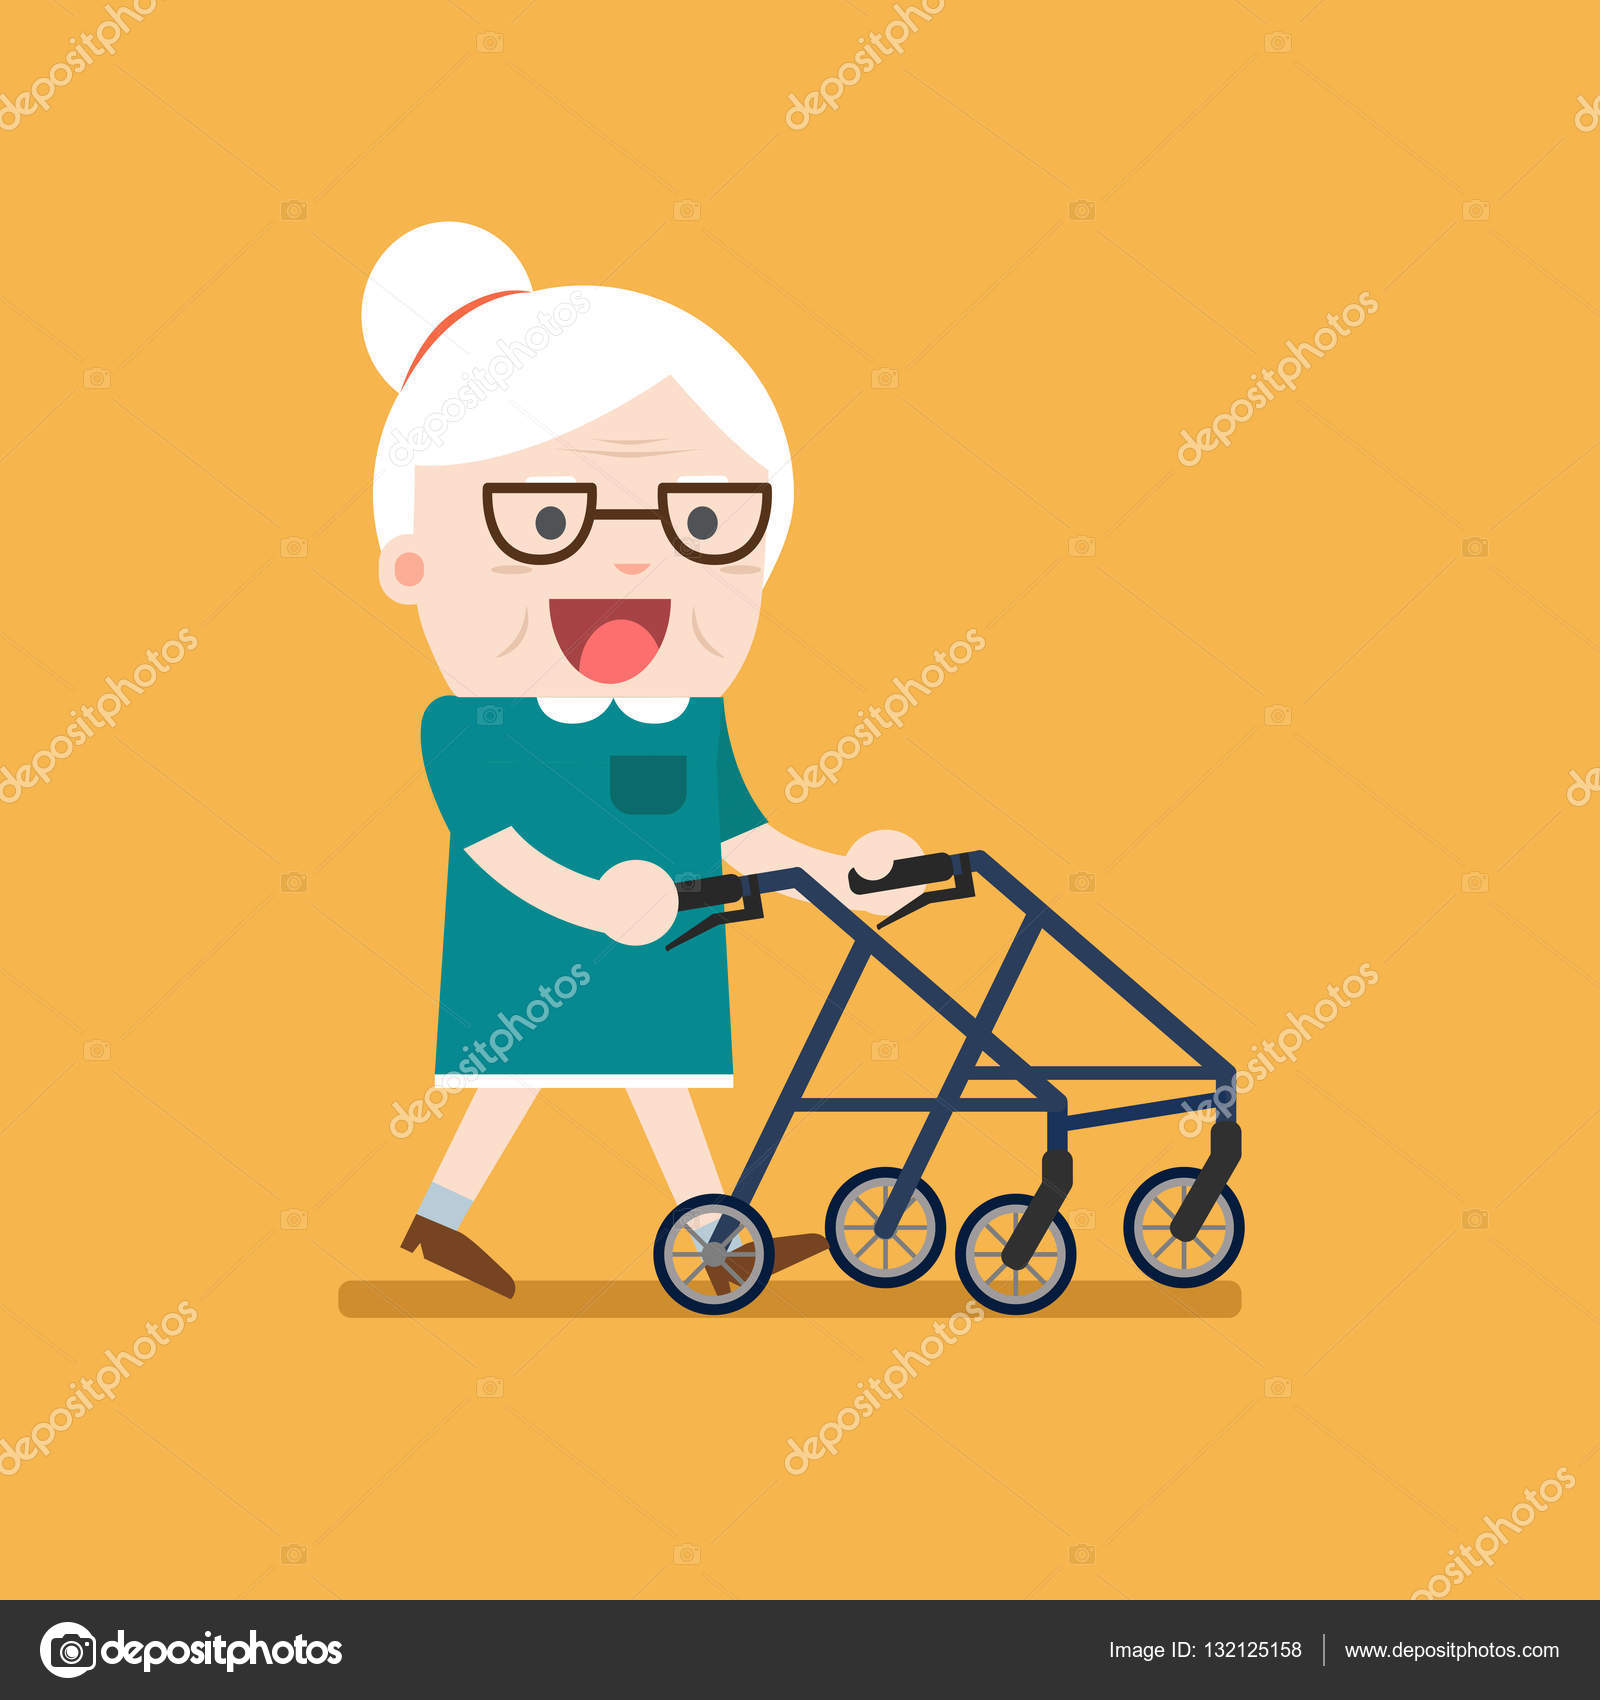 Elderly woman old lady character with paddle Vector Image